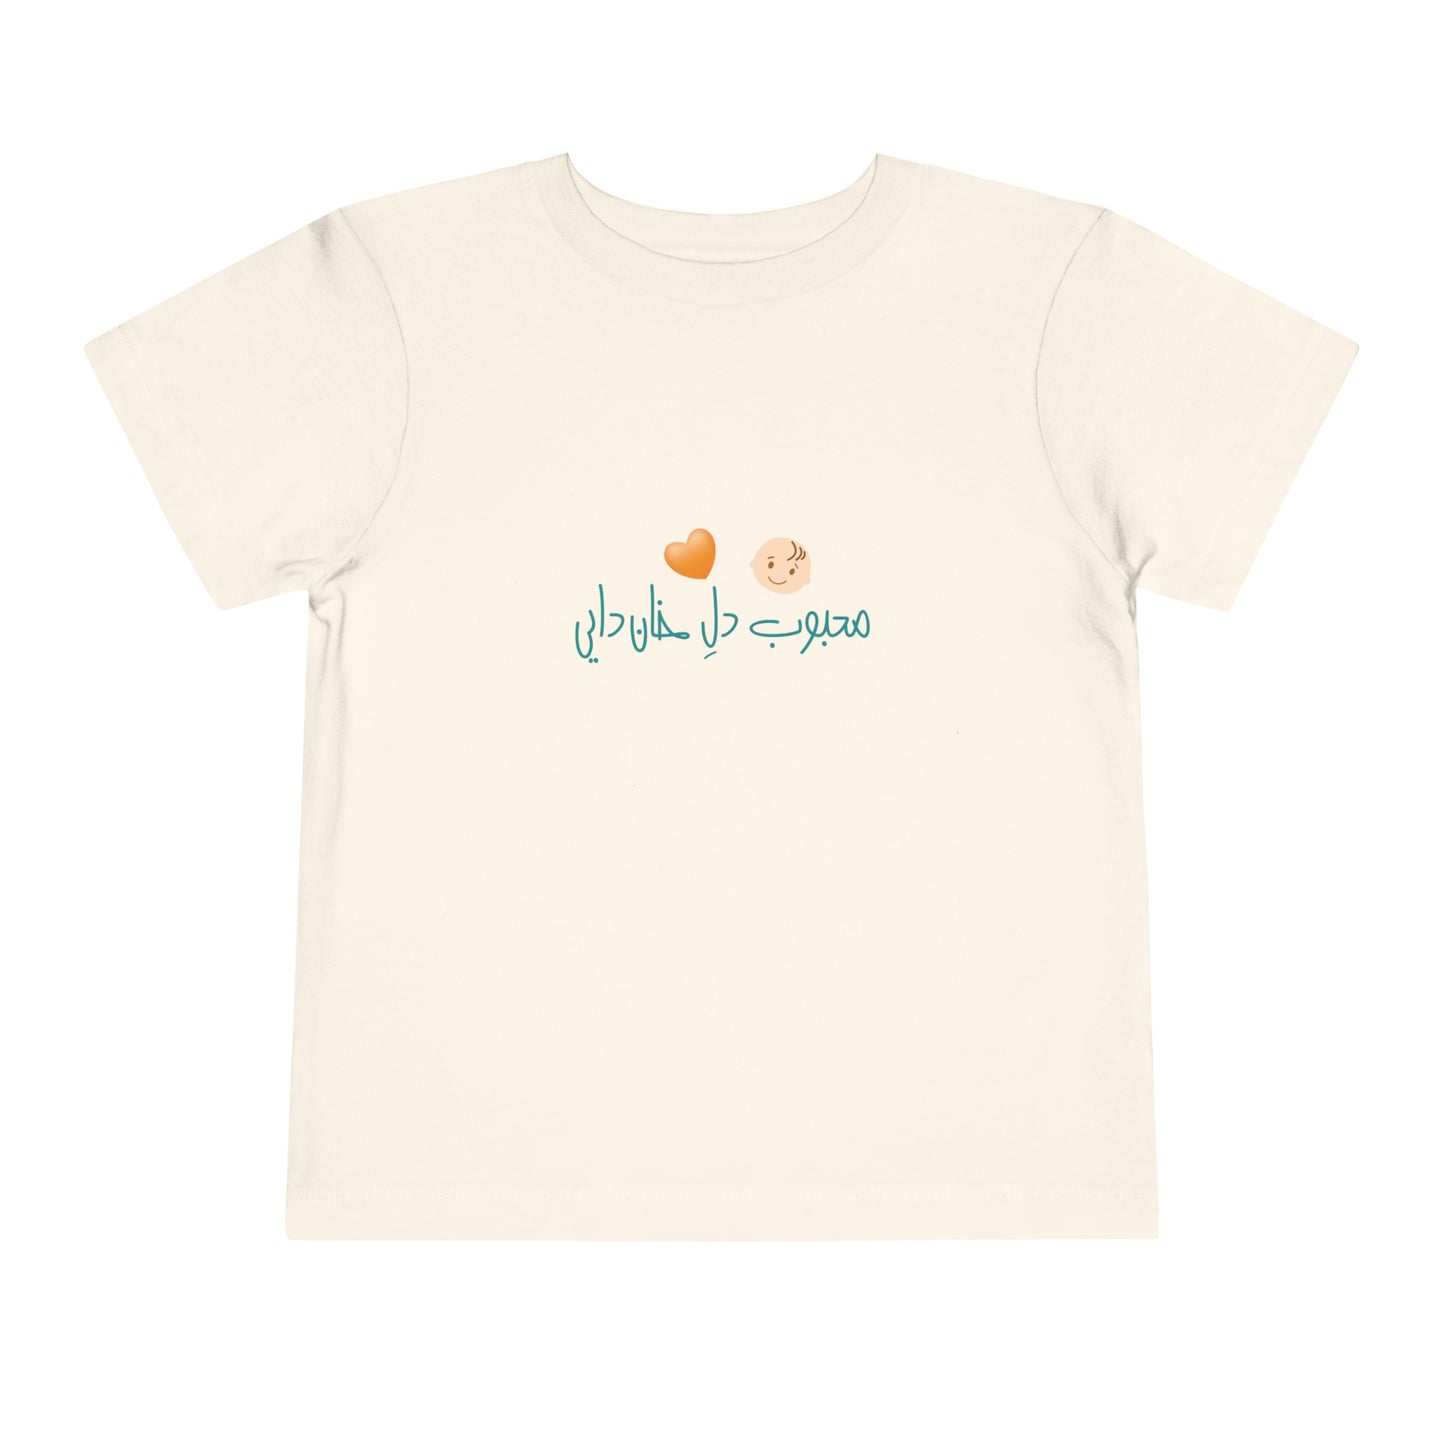 Toddler Short Sleeve Tee "My Uncle Loves Me"/محبوب دل خان دایی